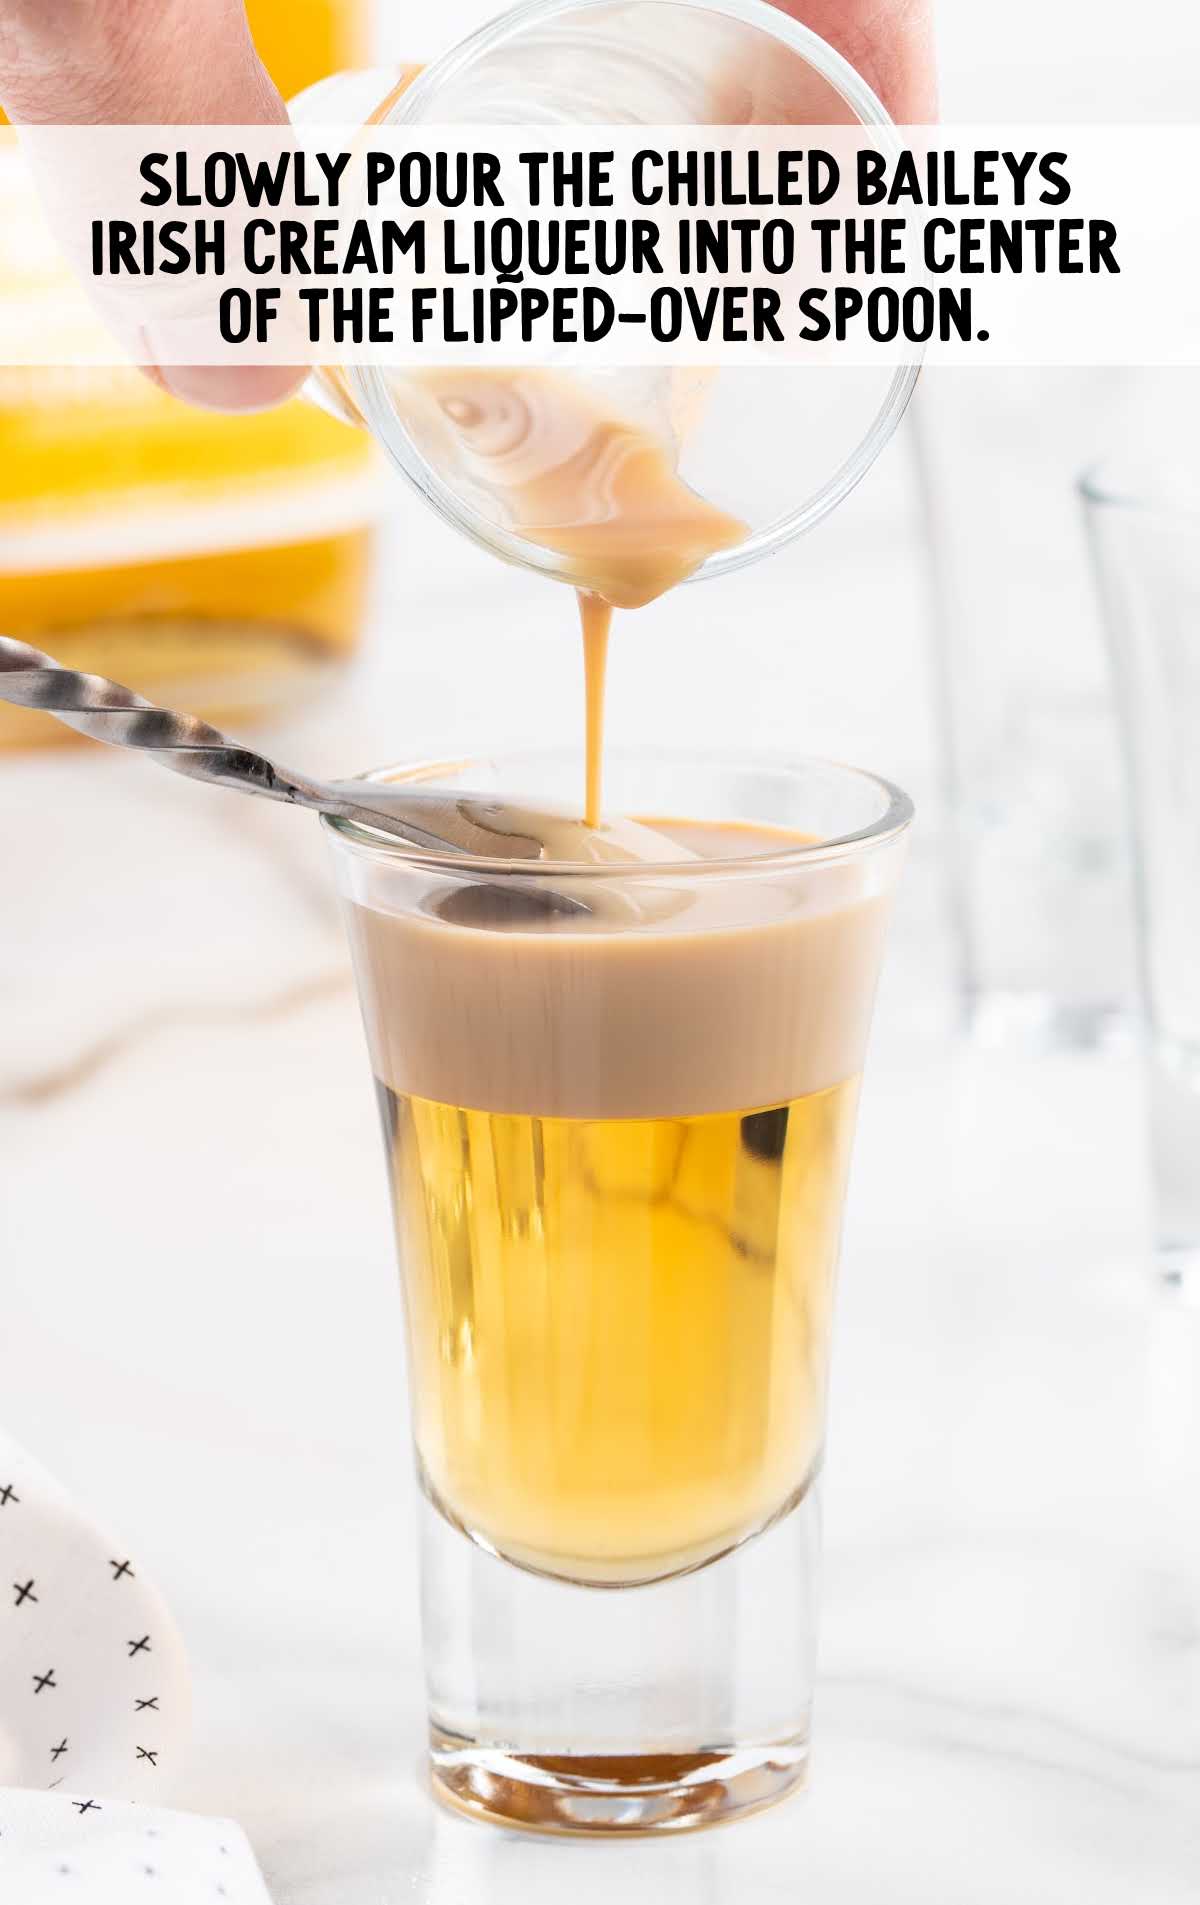 Baileys Irish cream liqueur poured into the center of the flipped over spoon